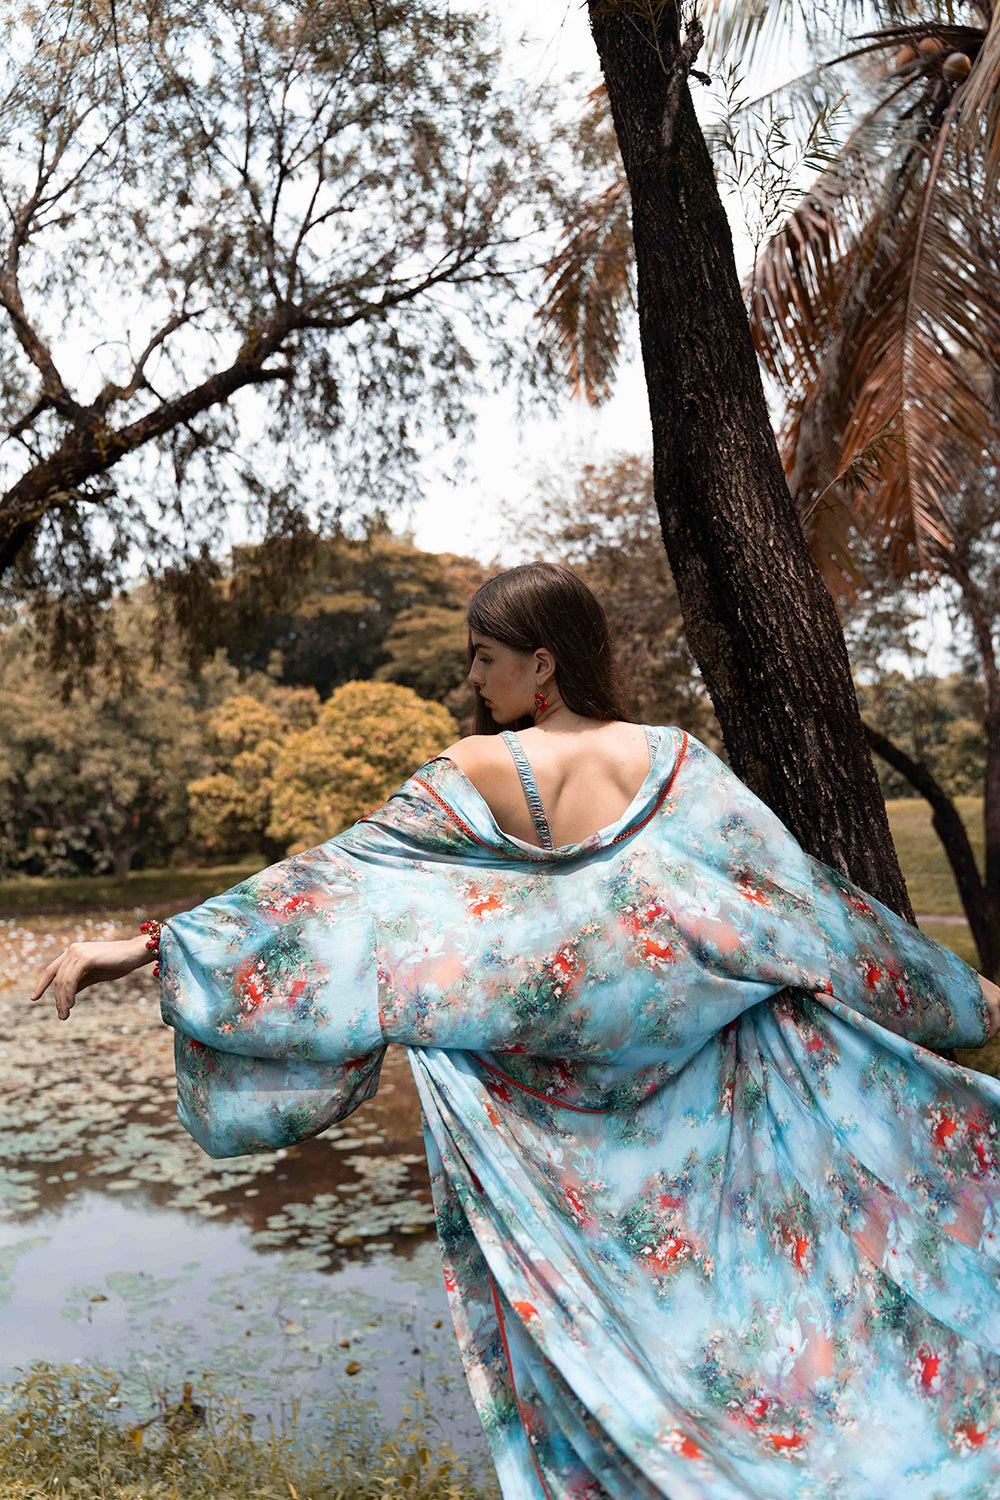 Introducing the latest sensation from Tulle and Batiste, the Moriko Kimono from our Forest Blue collection, meticulously crafted by our skilled Balinese artisans for the ethically conscious fashionista.